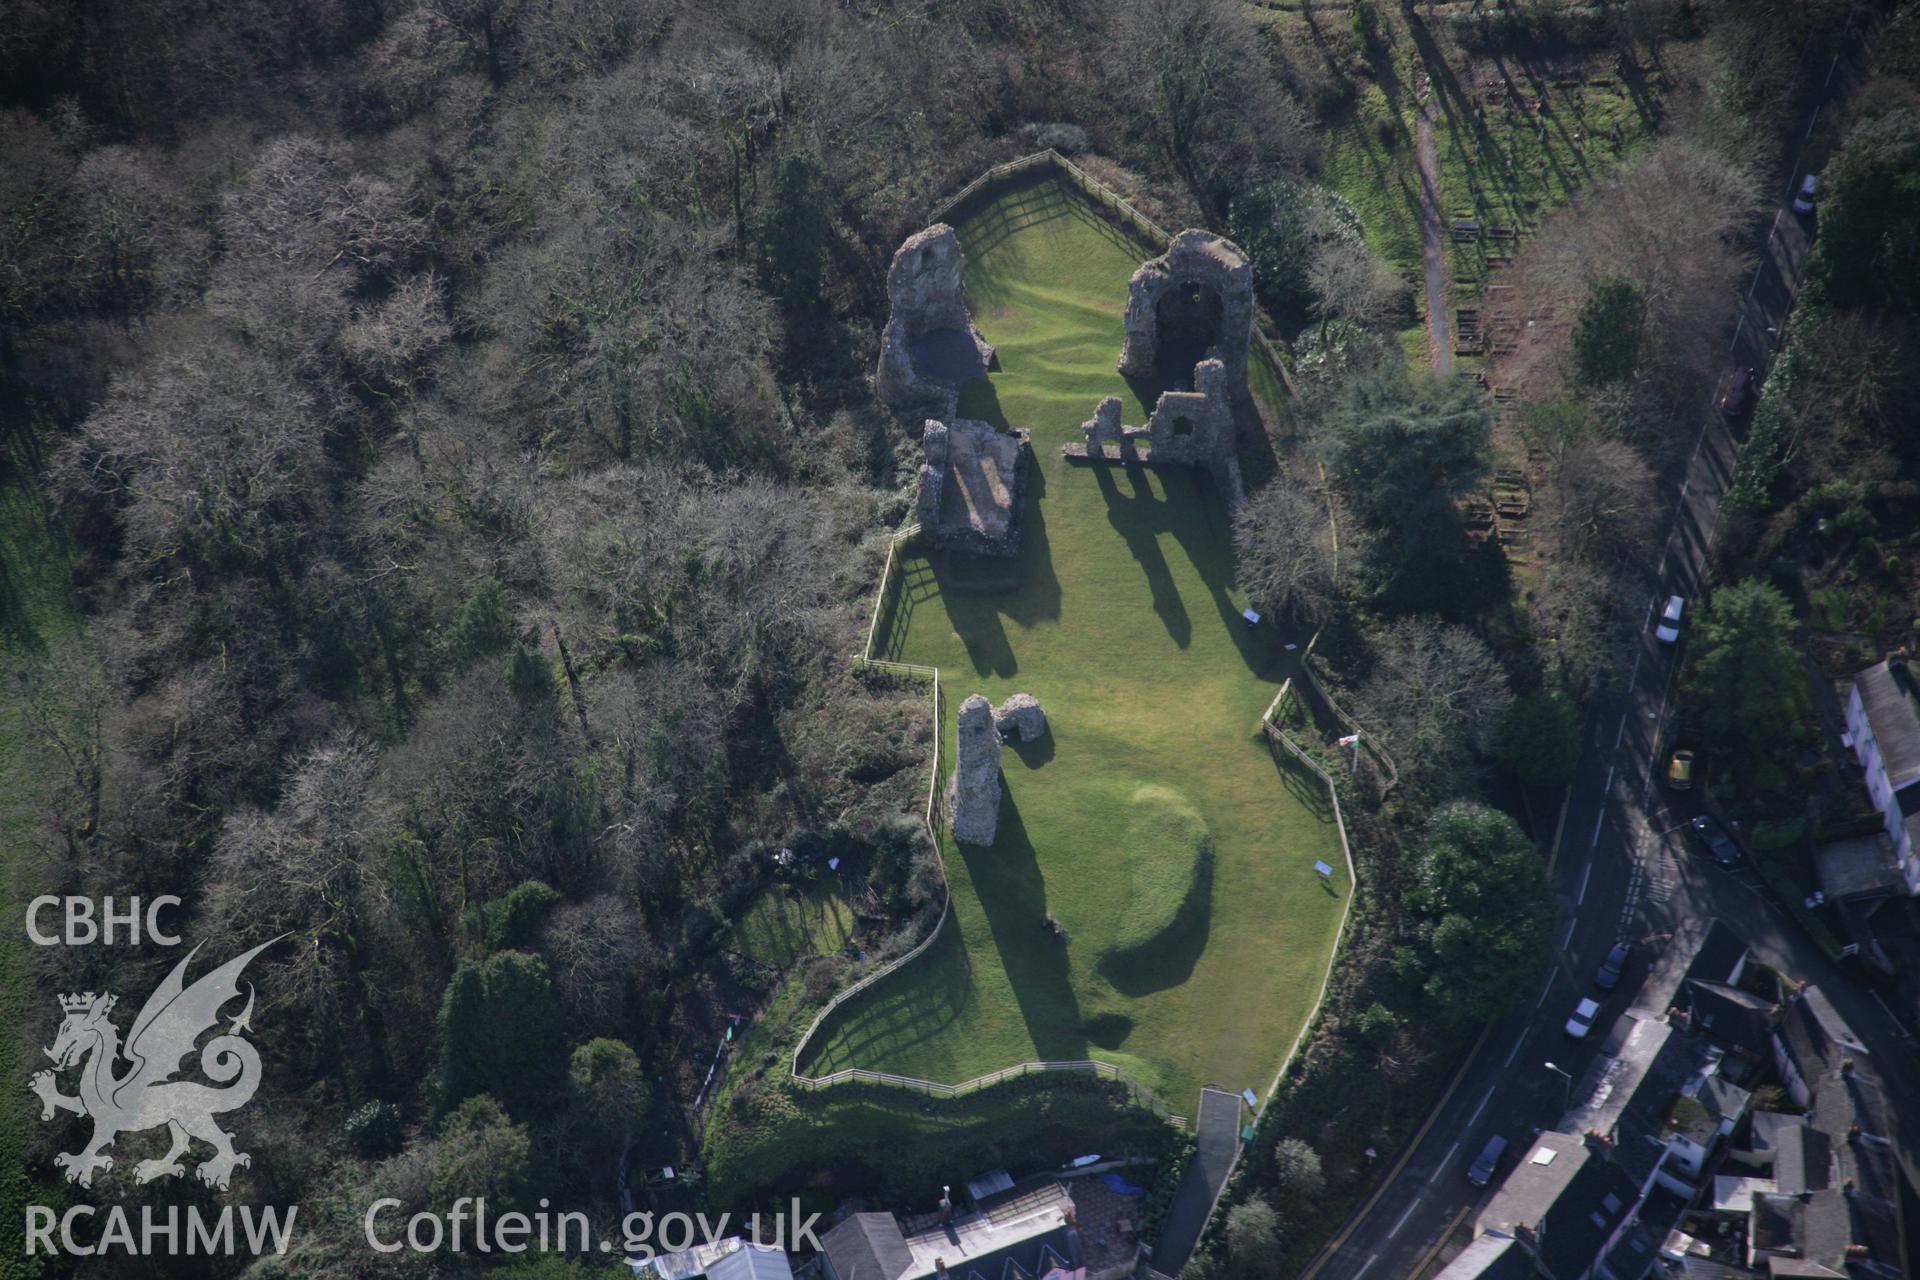 RCAHMW colour oblique aerial photograph of Narberth Castle, viewed from the north. Taken on 11 January 2006 by Toby Driver.